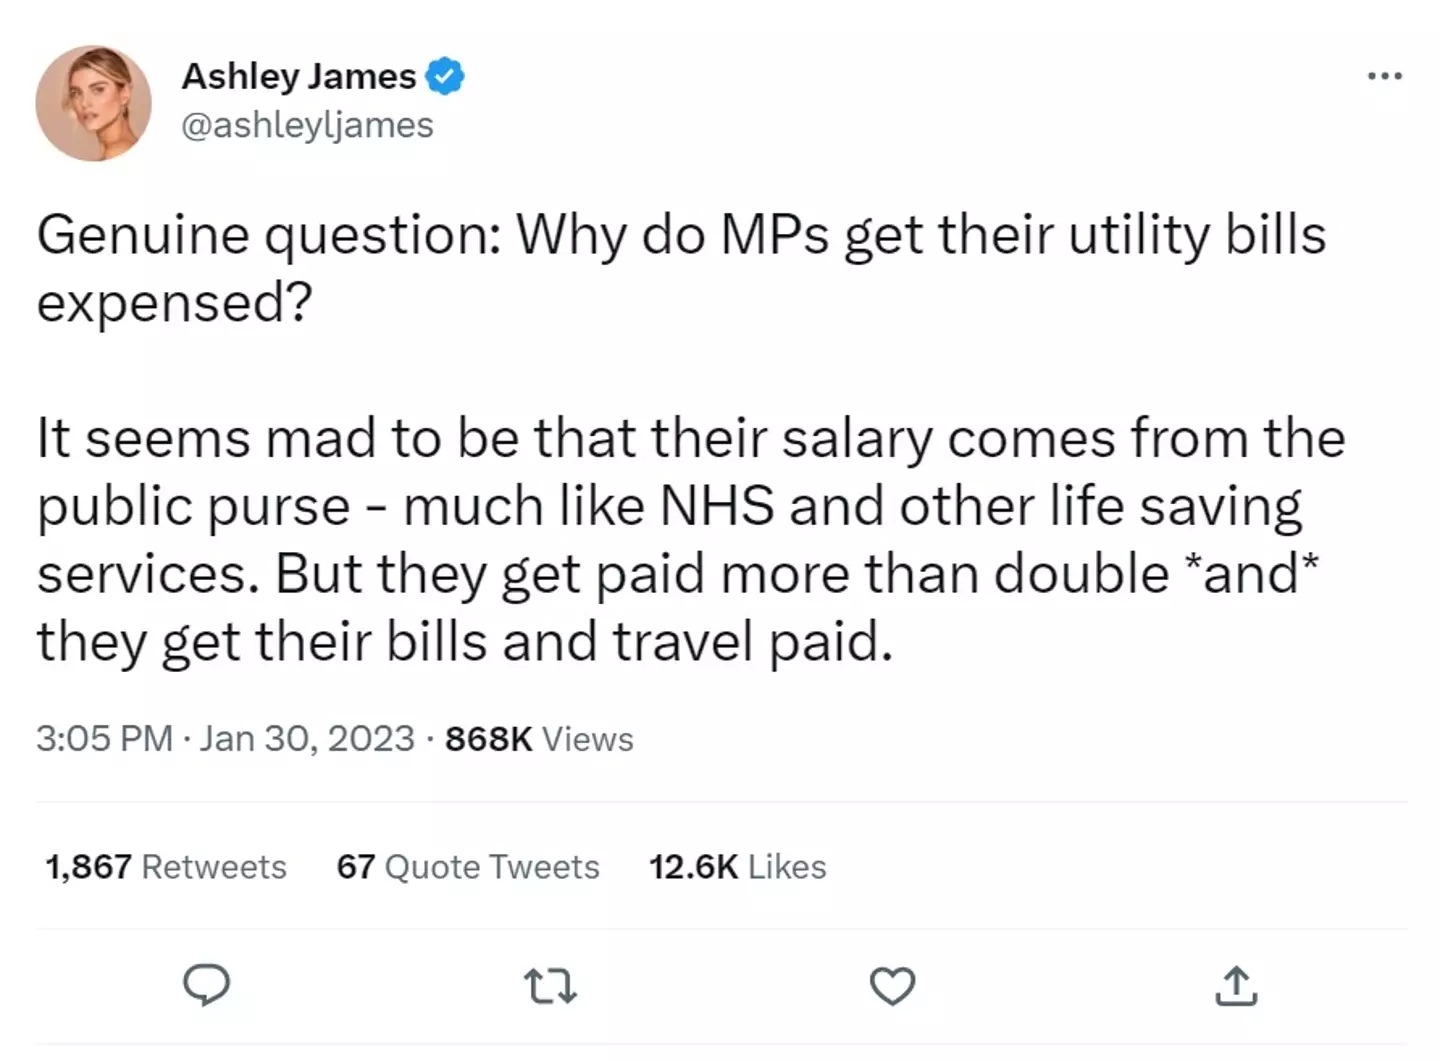 Ashley James wondered why MPs got to put their utility bills on expenses.